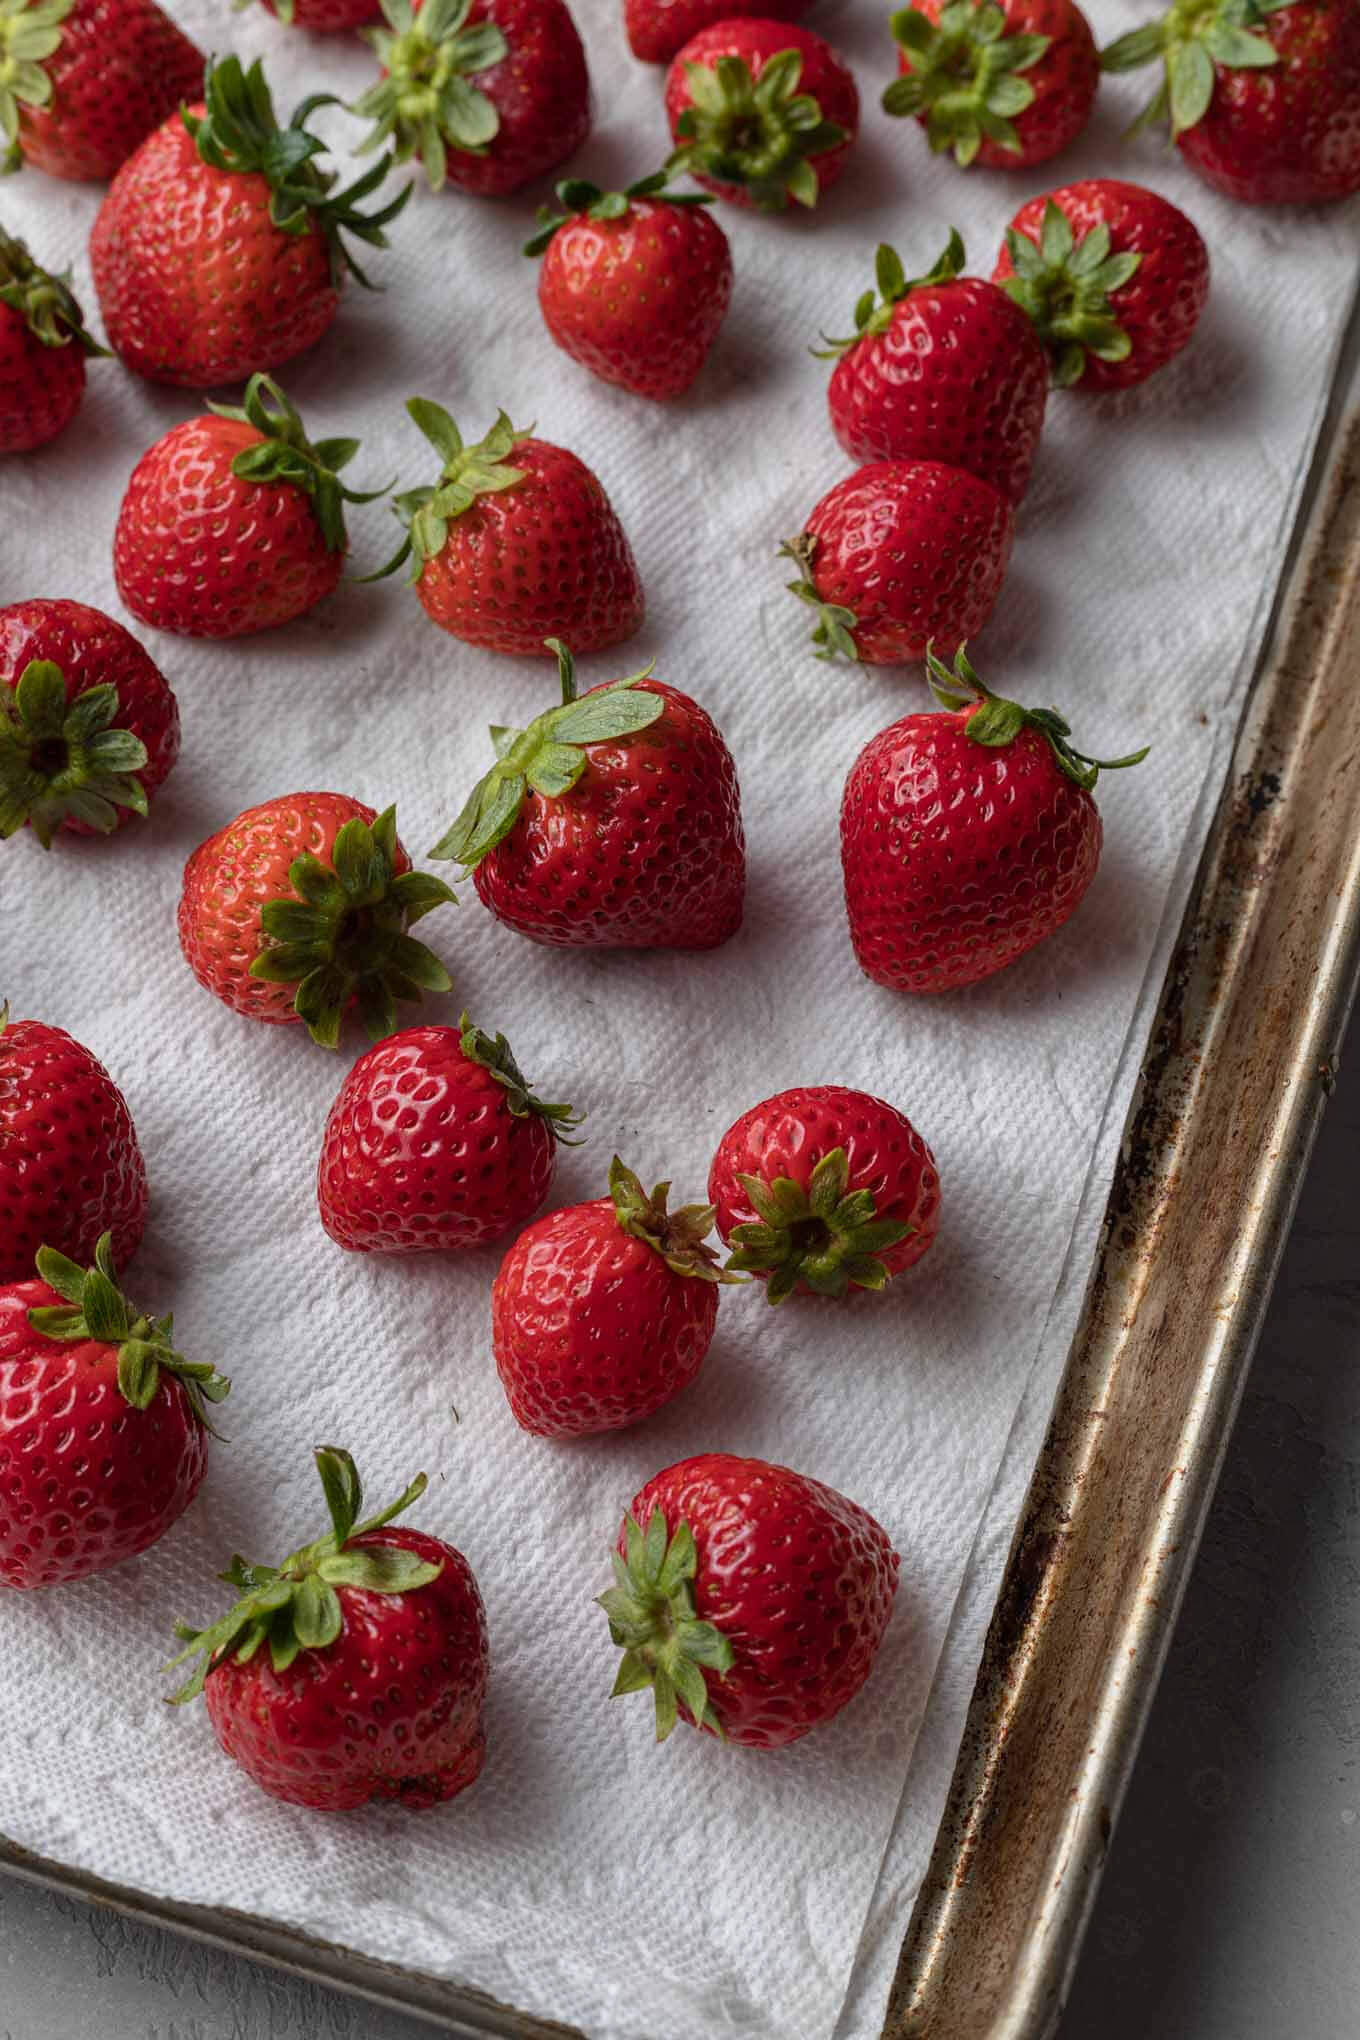 Fresh strawberries washed and left to dry on a paper towel-lined baking tray. 